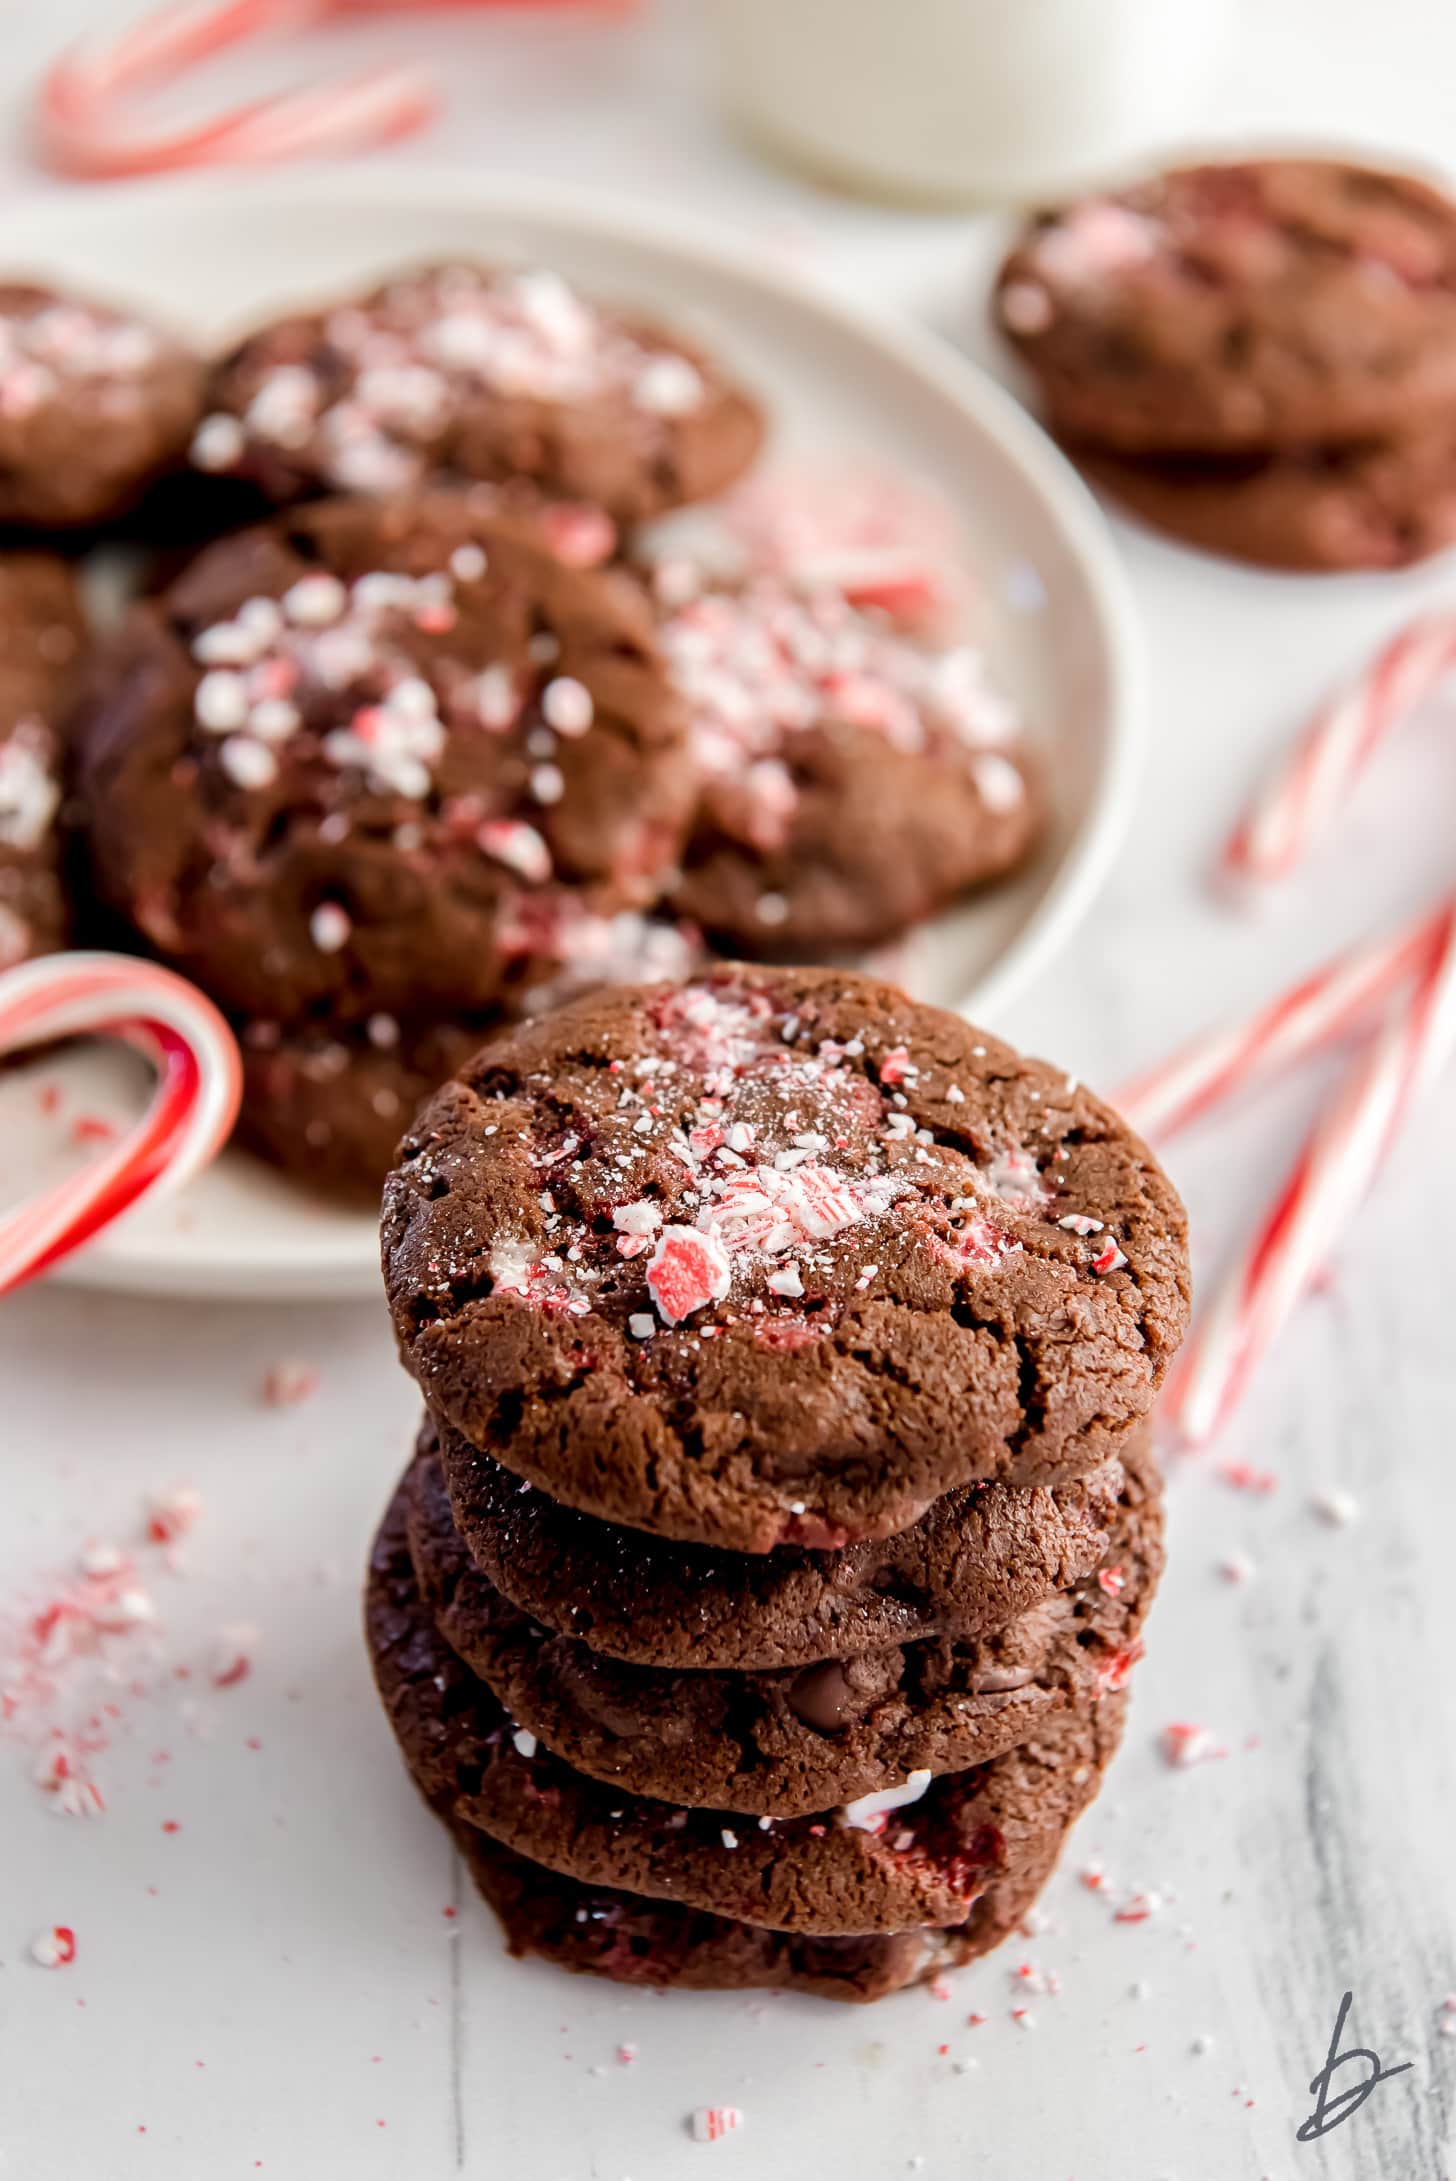 stack of four double chocolate peppermint cookies with crushed peppermint on top in front of plate with more cookies.